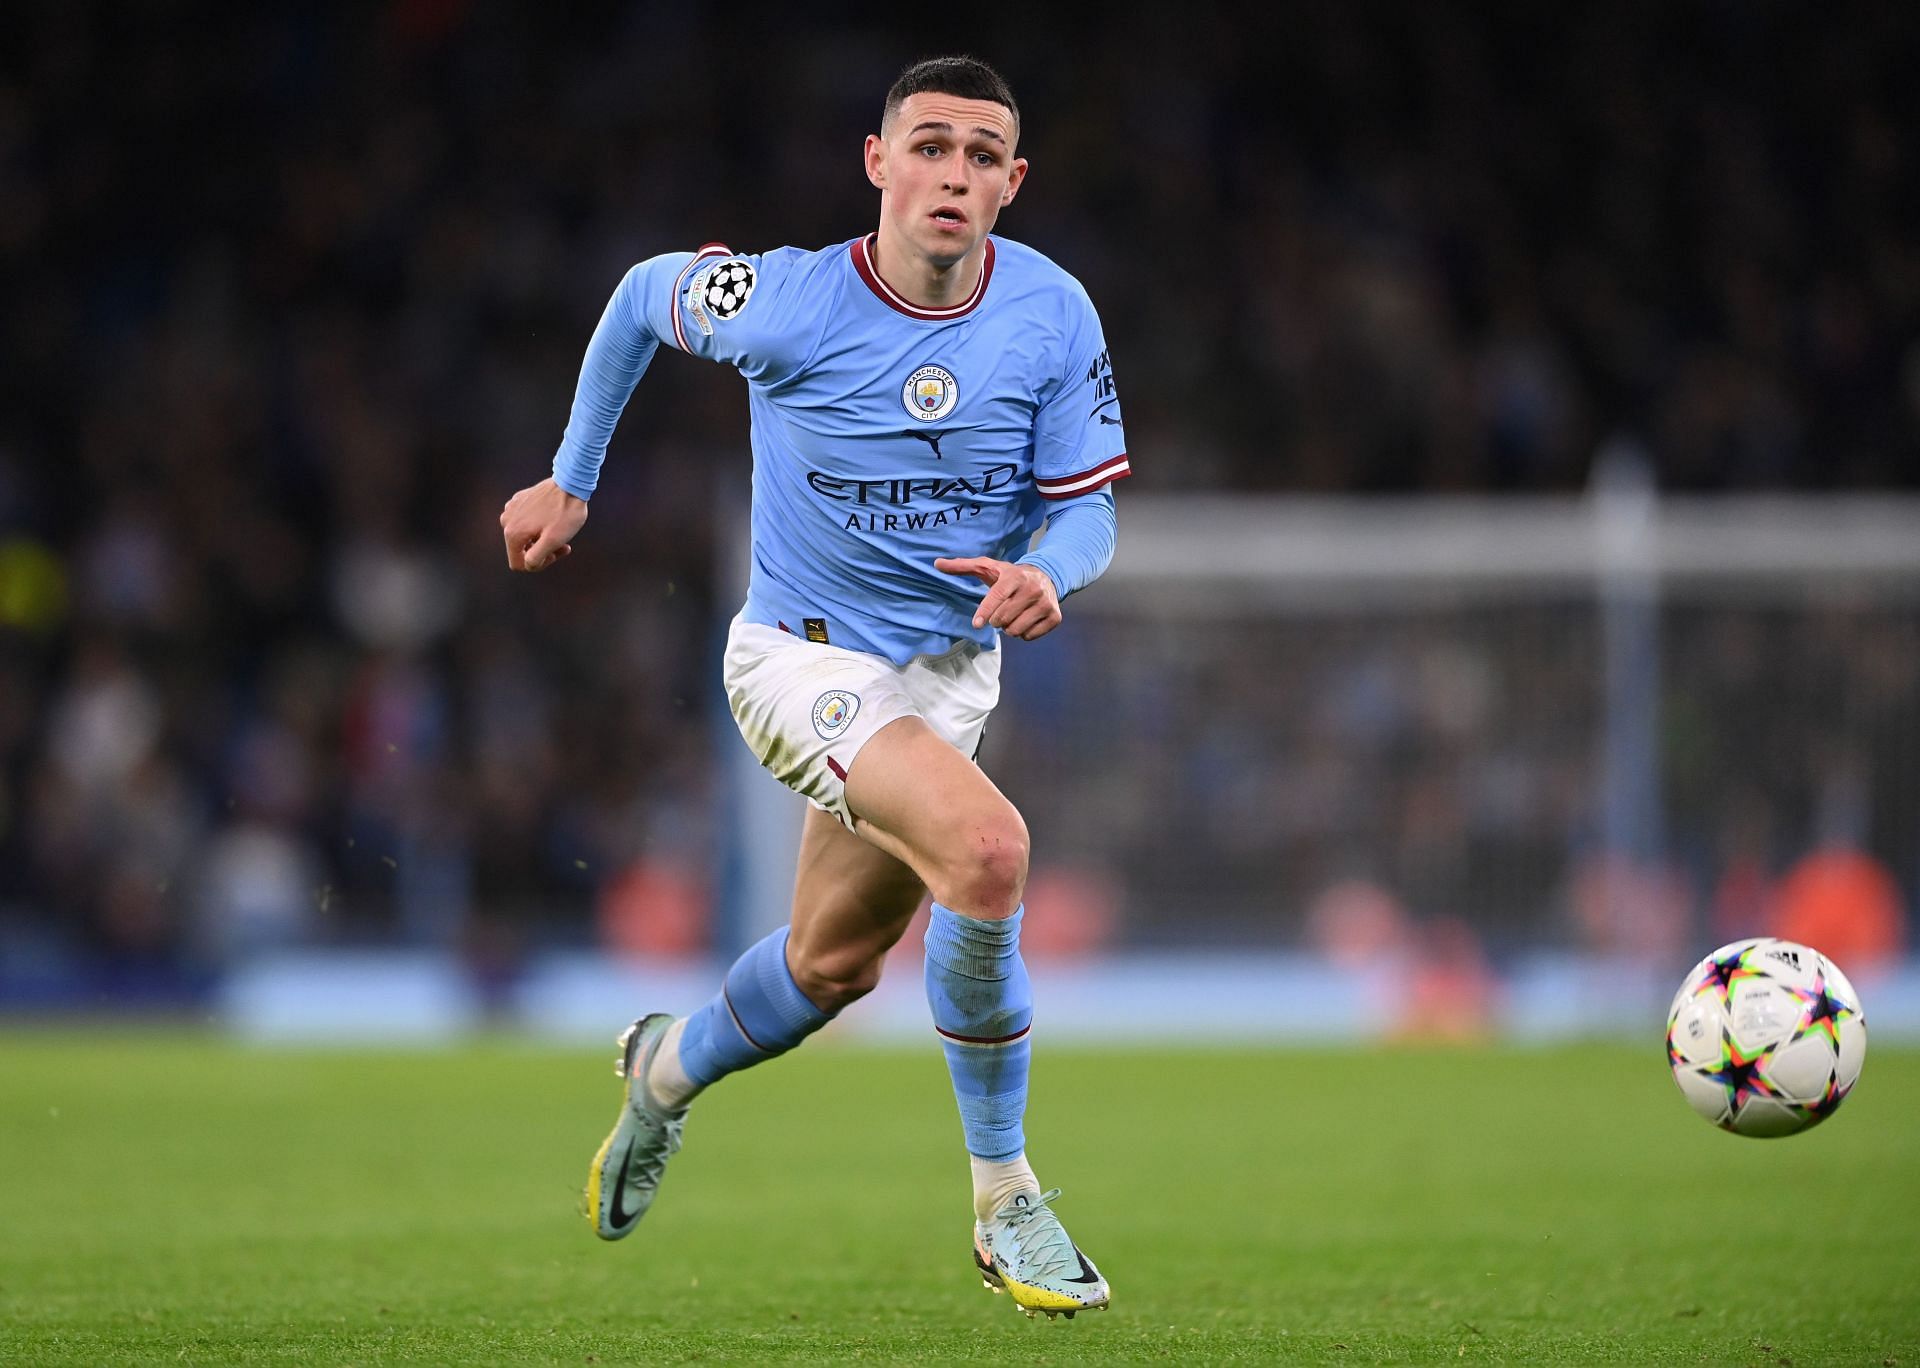 Foden has been impressive for Manchester City this season